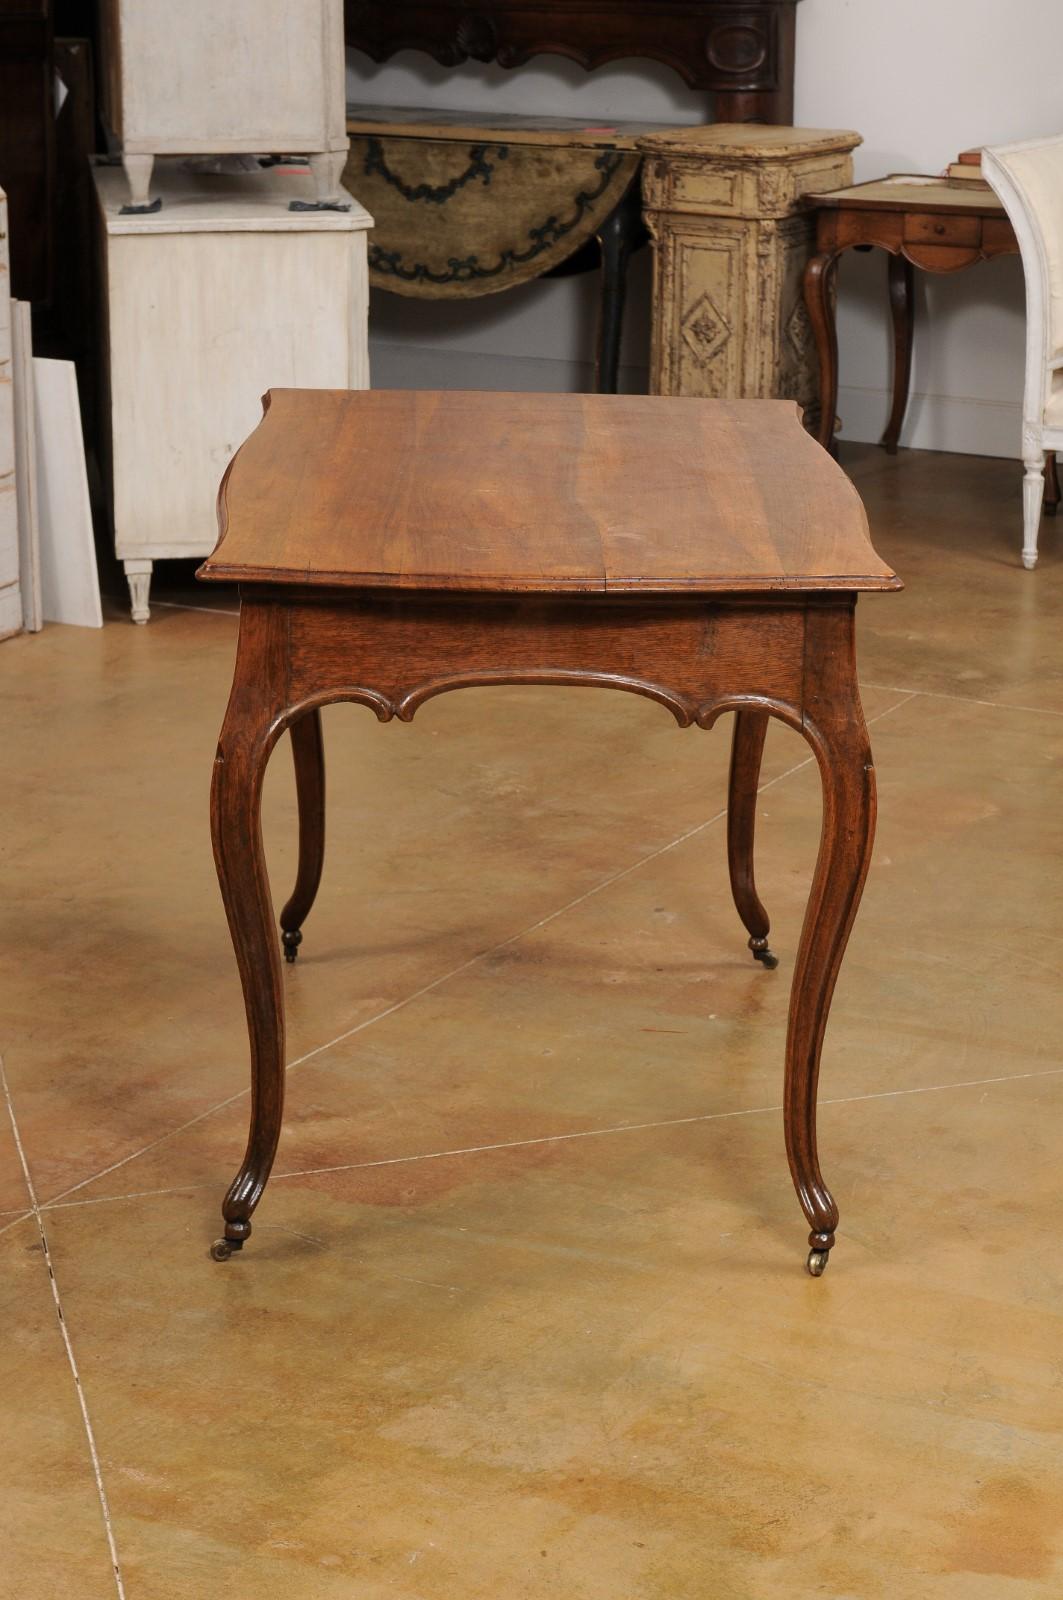 Italian Rococo Early 19th Century Oak Table with Carved Apron and Cabriole Legs For Sale 1